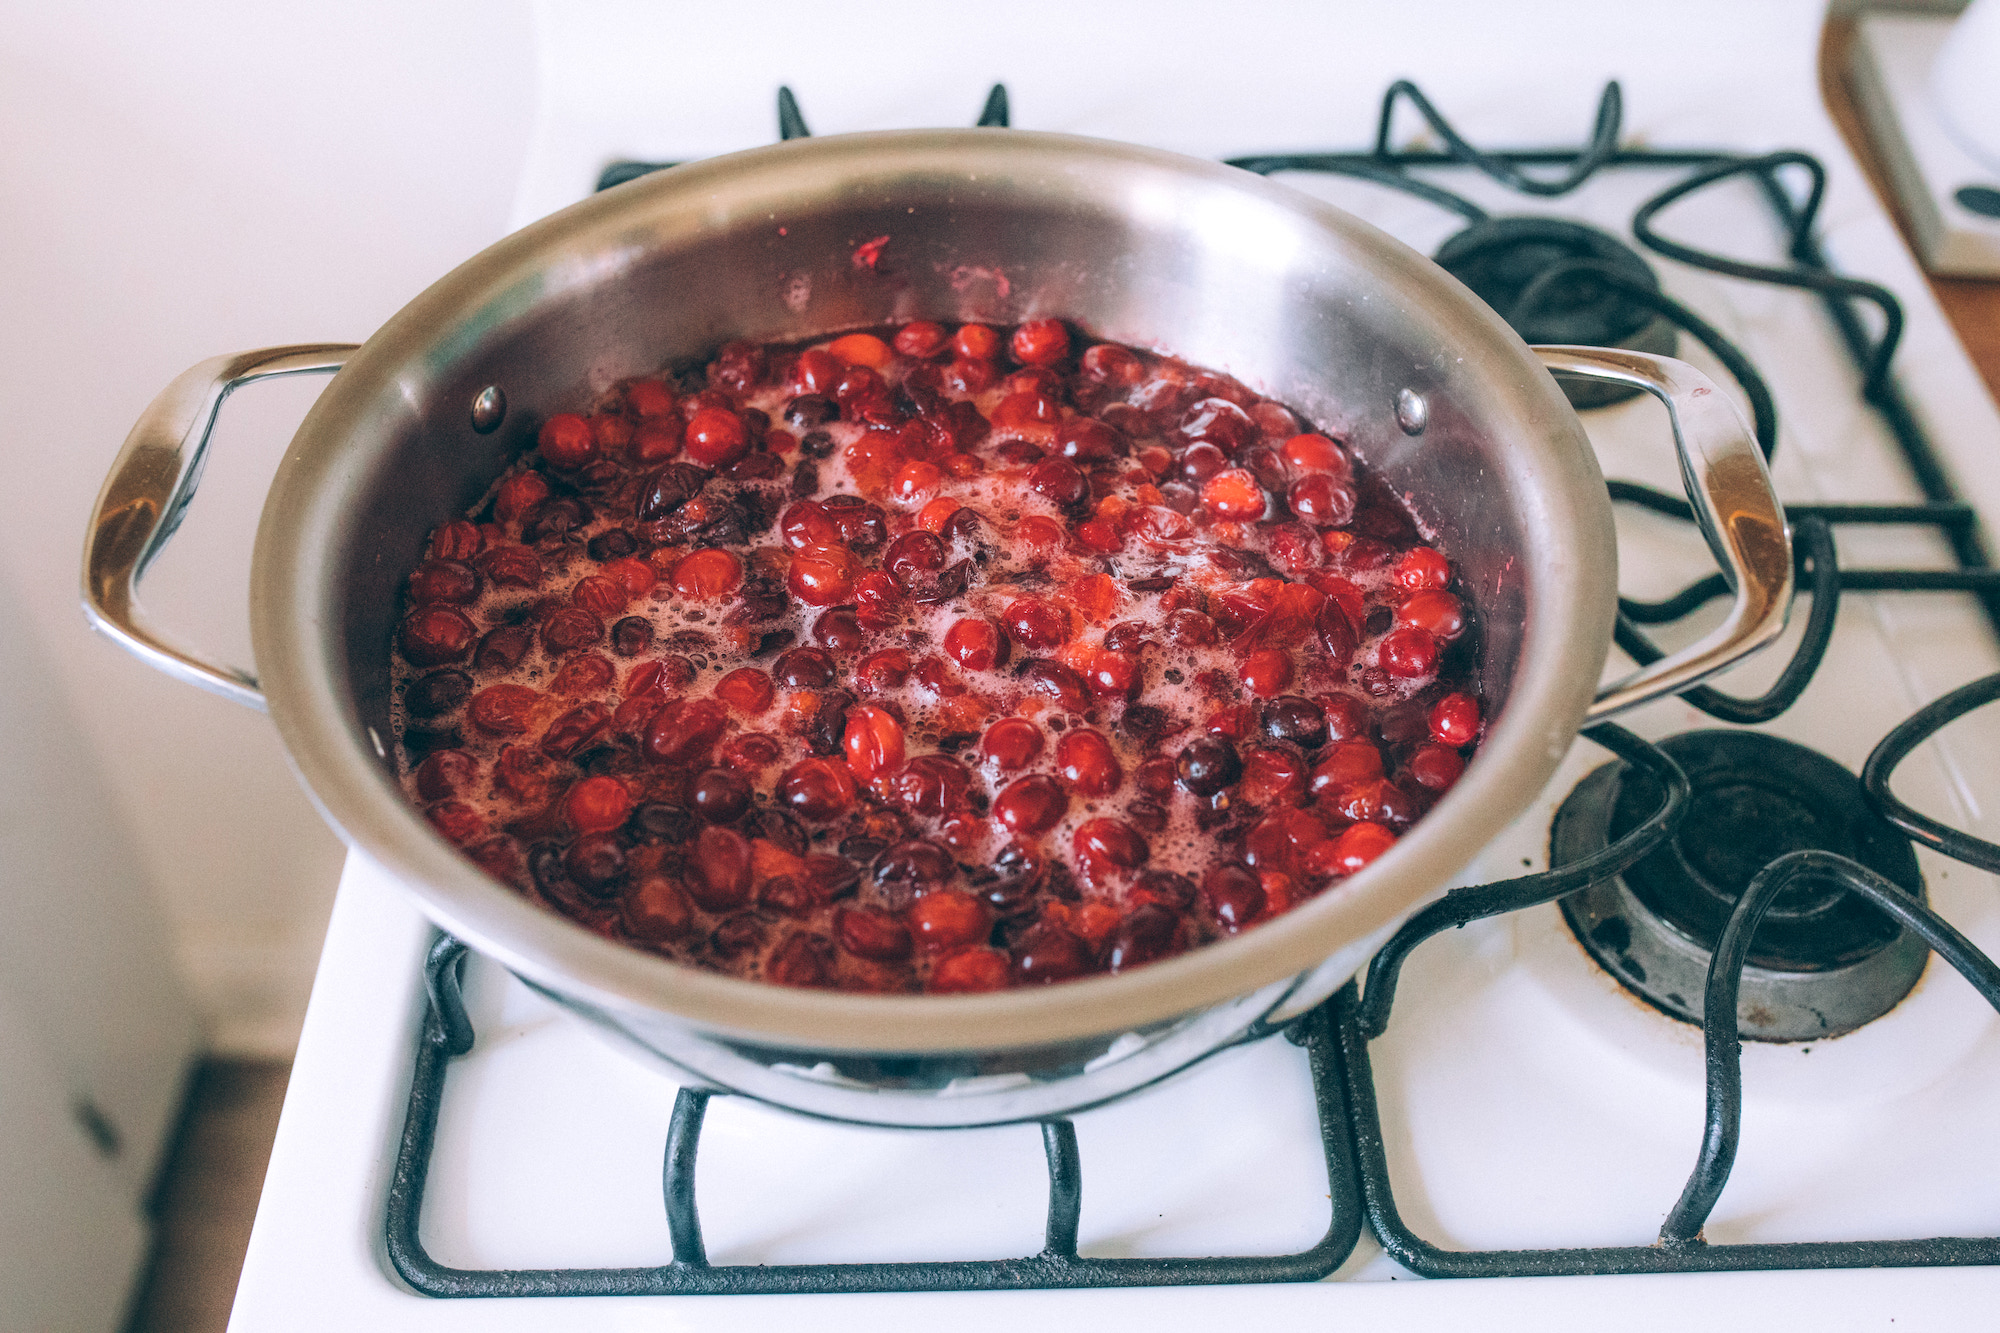 Cooking cranberries for jelly